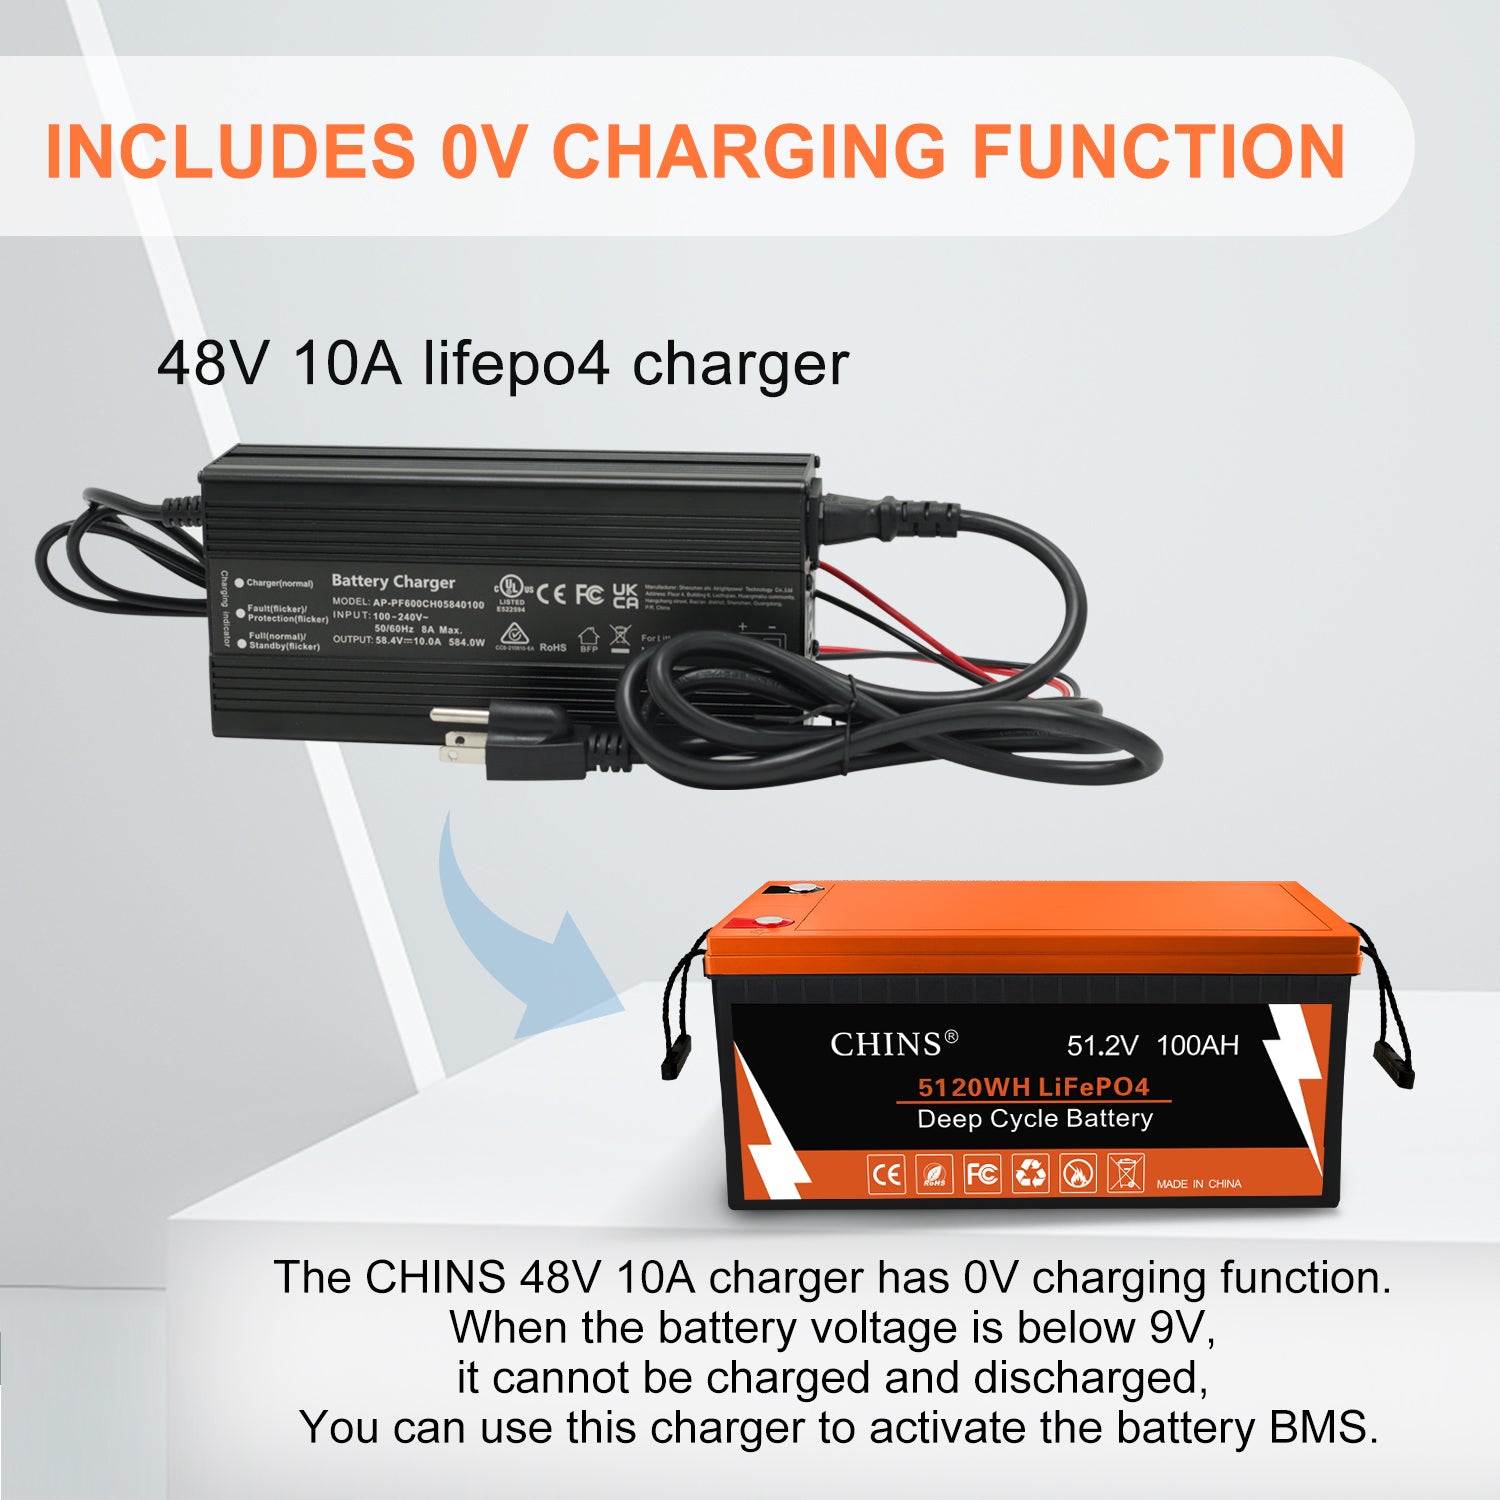 CHINS 24V 100Ah Lithium Battery, Built-in 100A BMS, 2000+ Cycles